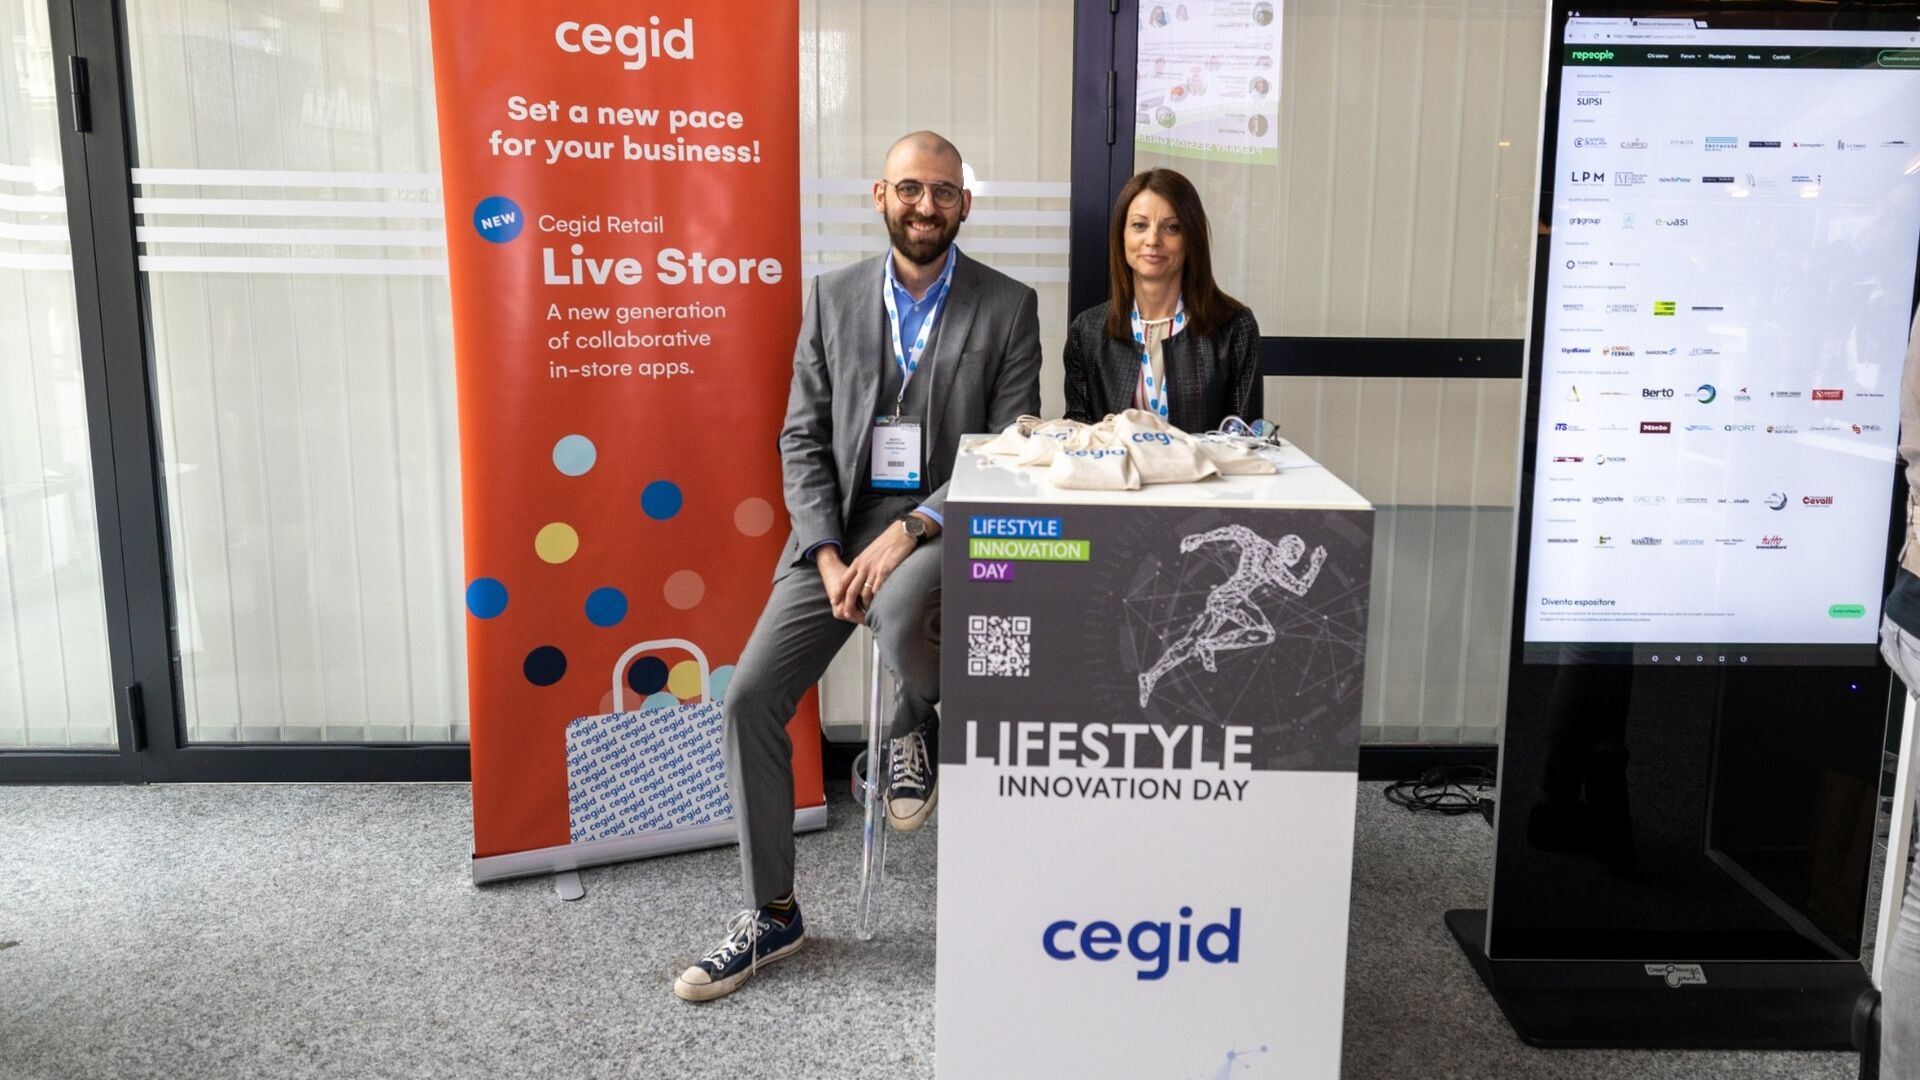 Lifestyle Innovation Day: the stands at the LAC in Lugano on 13 March 2023